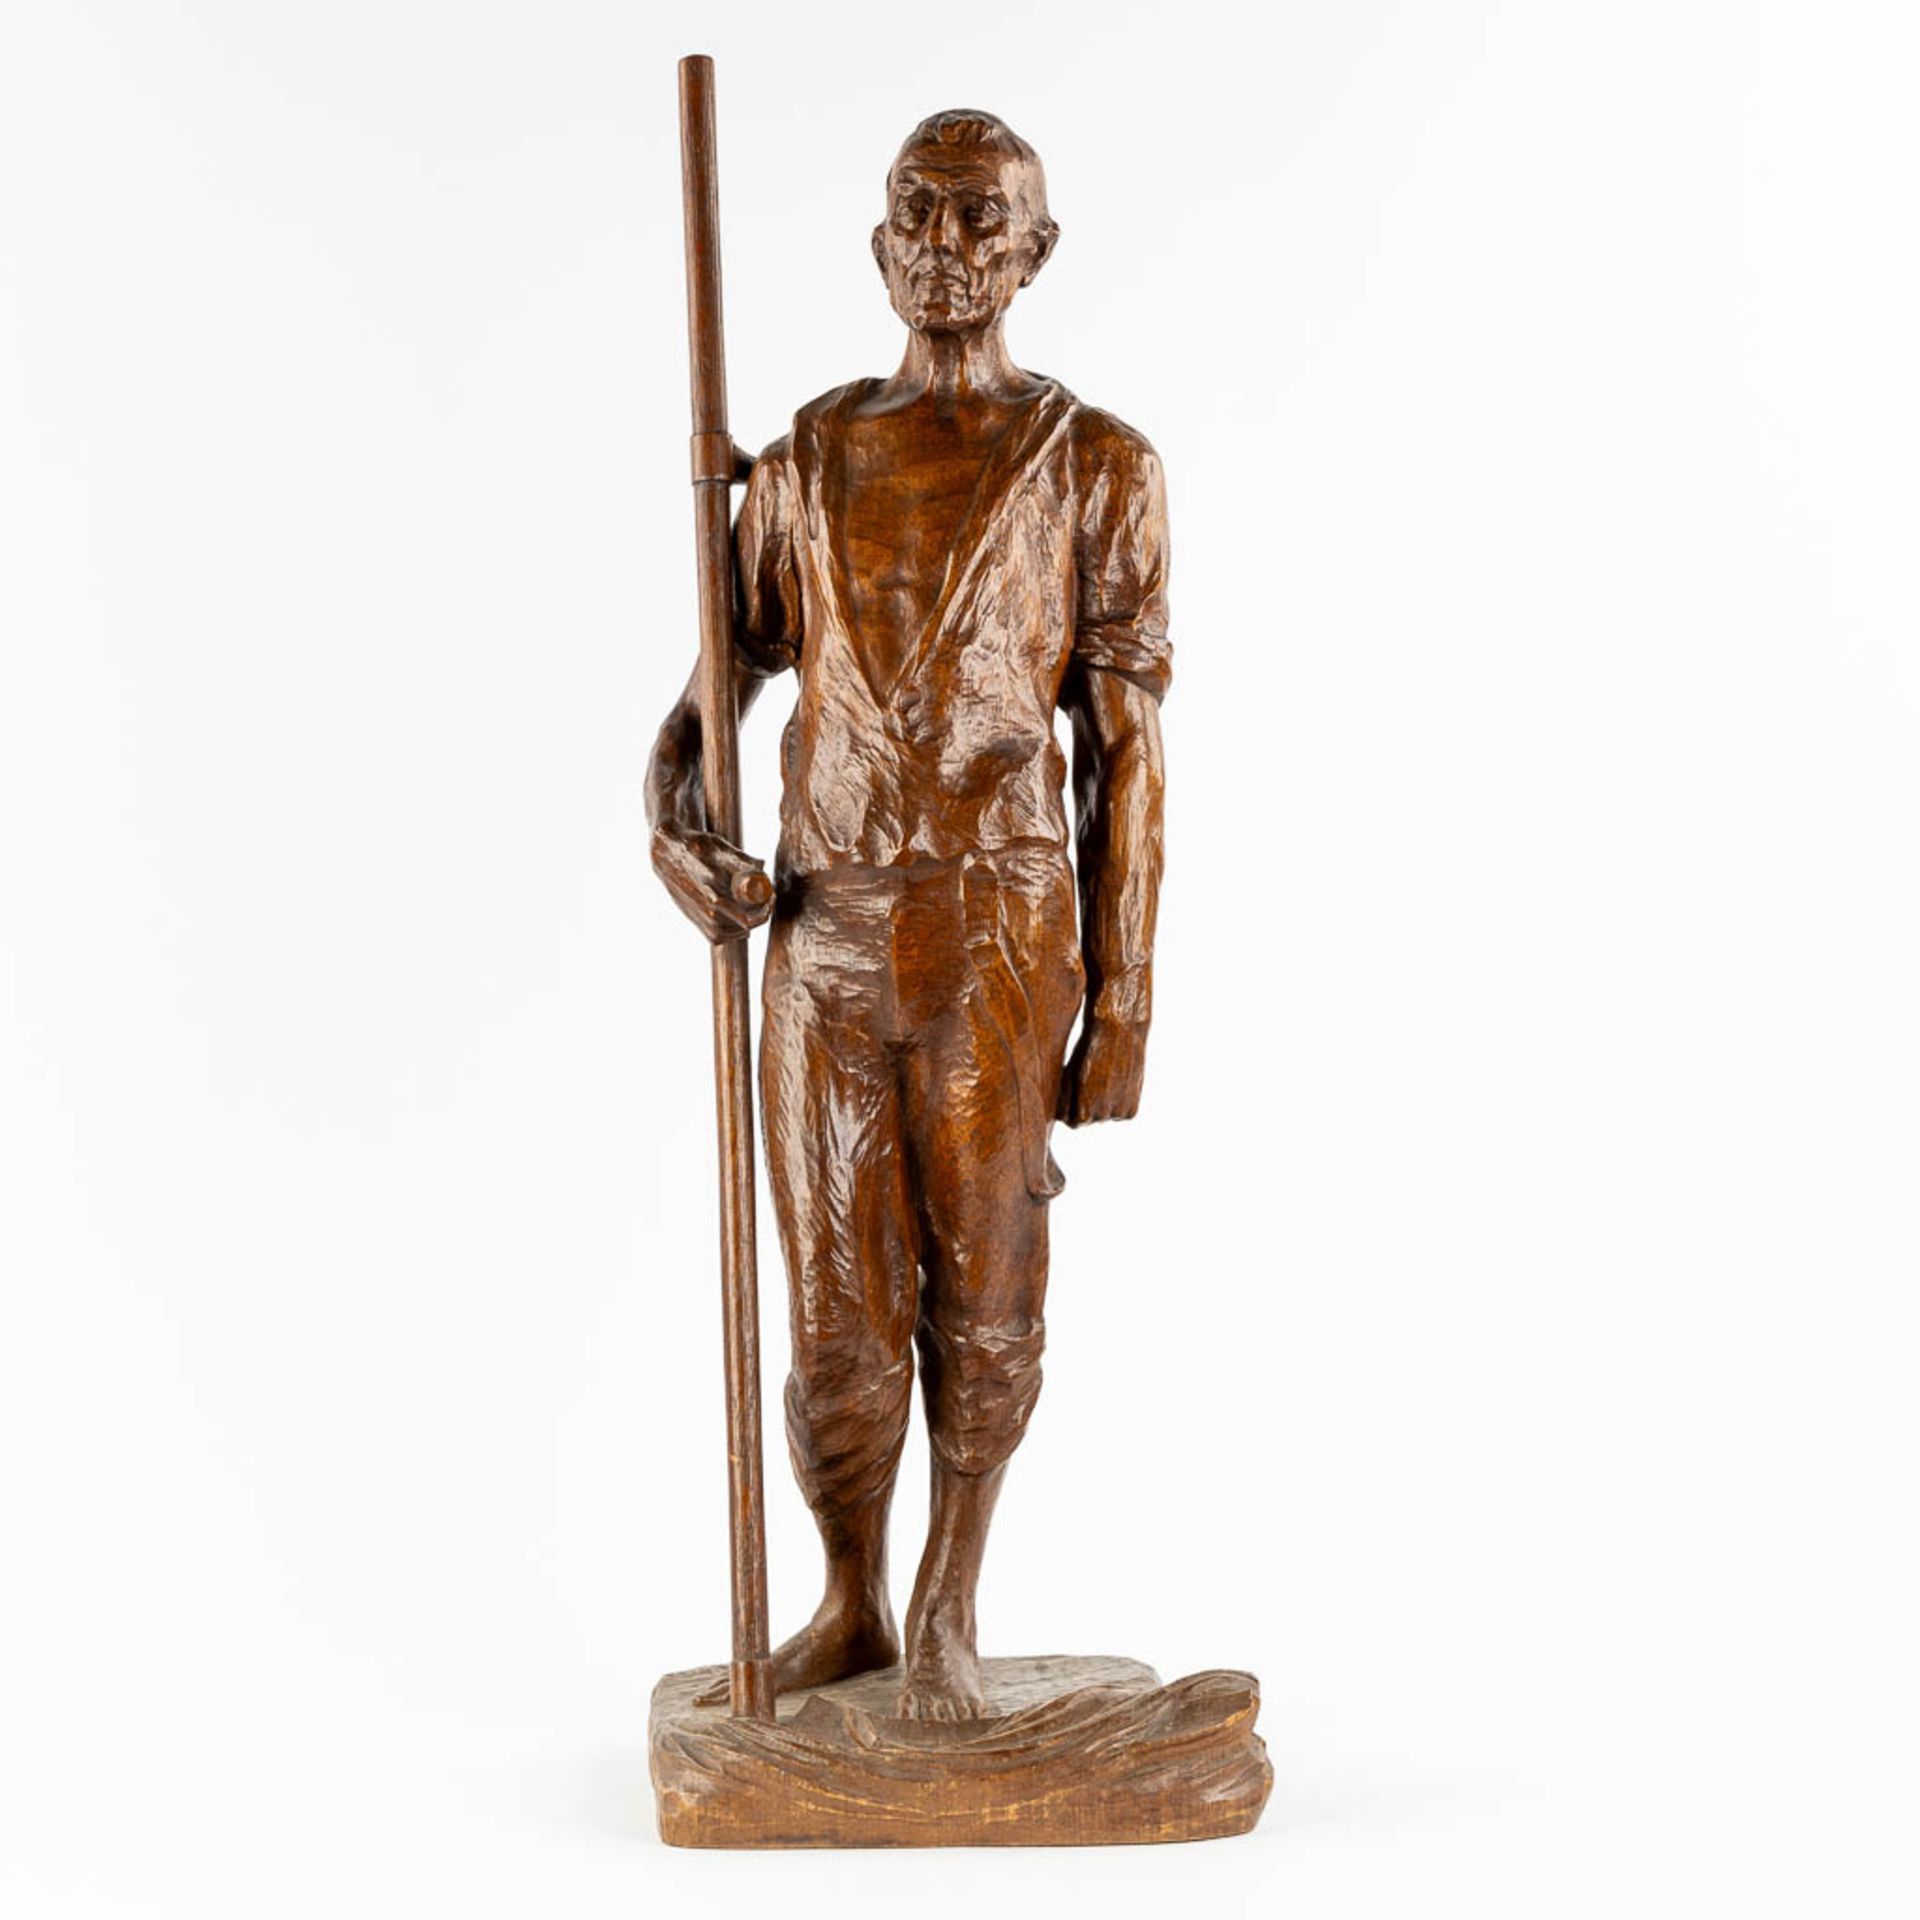 Beaudouin TUERLINCKX (1873-1945) 'Harvester with a scythe' sculptured wood. (L:27 x W:31 x H:90 cm) - Image 9 of 9